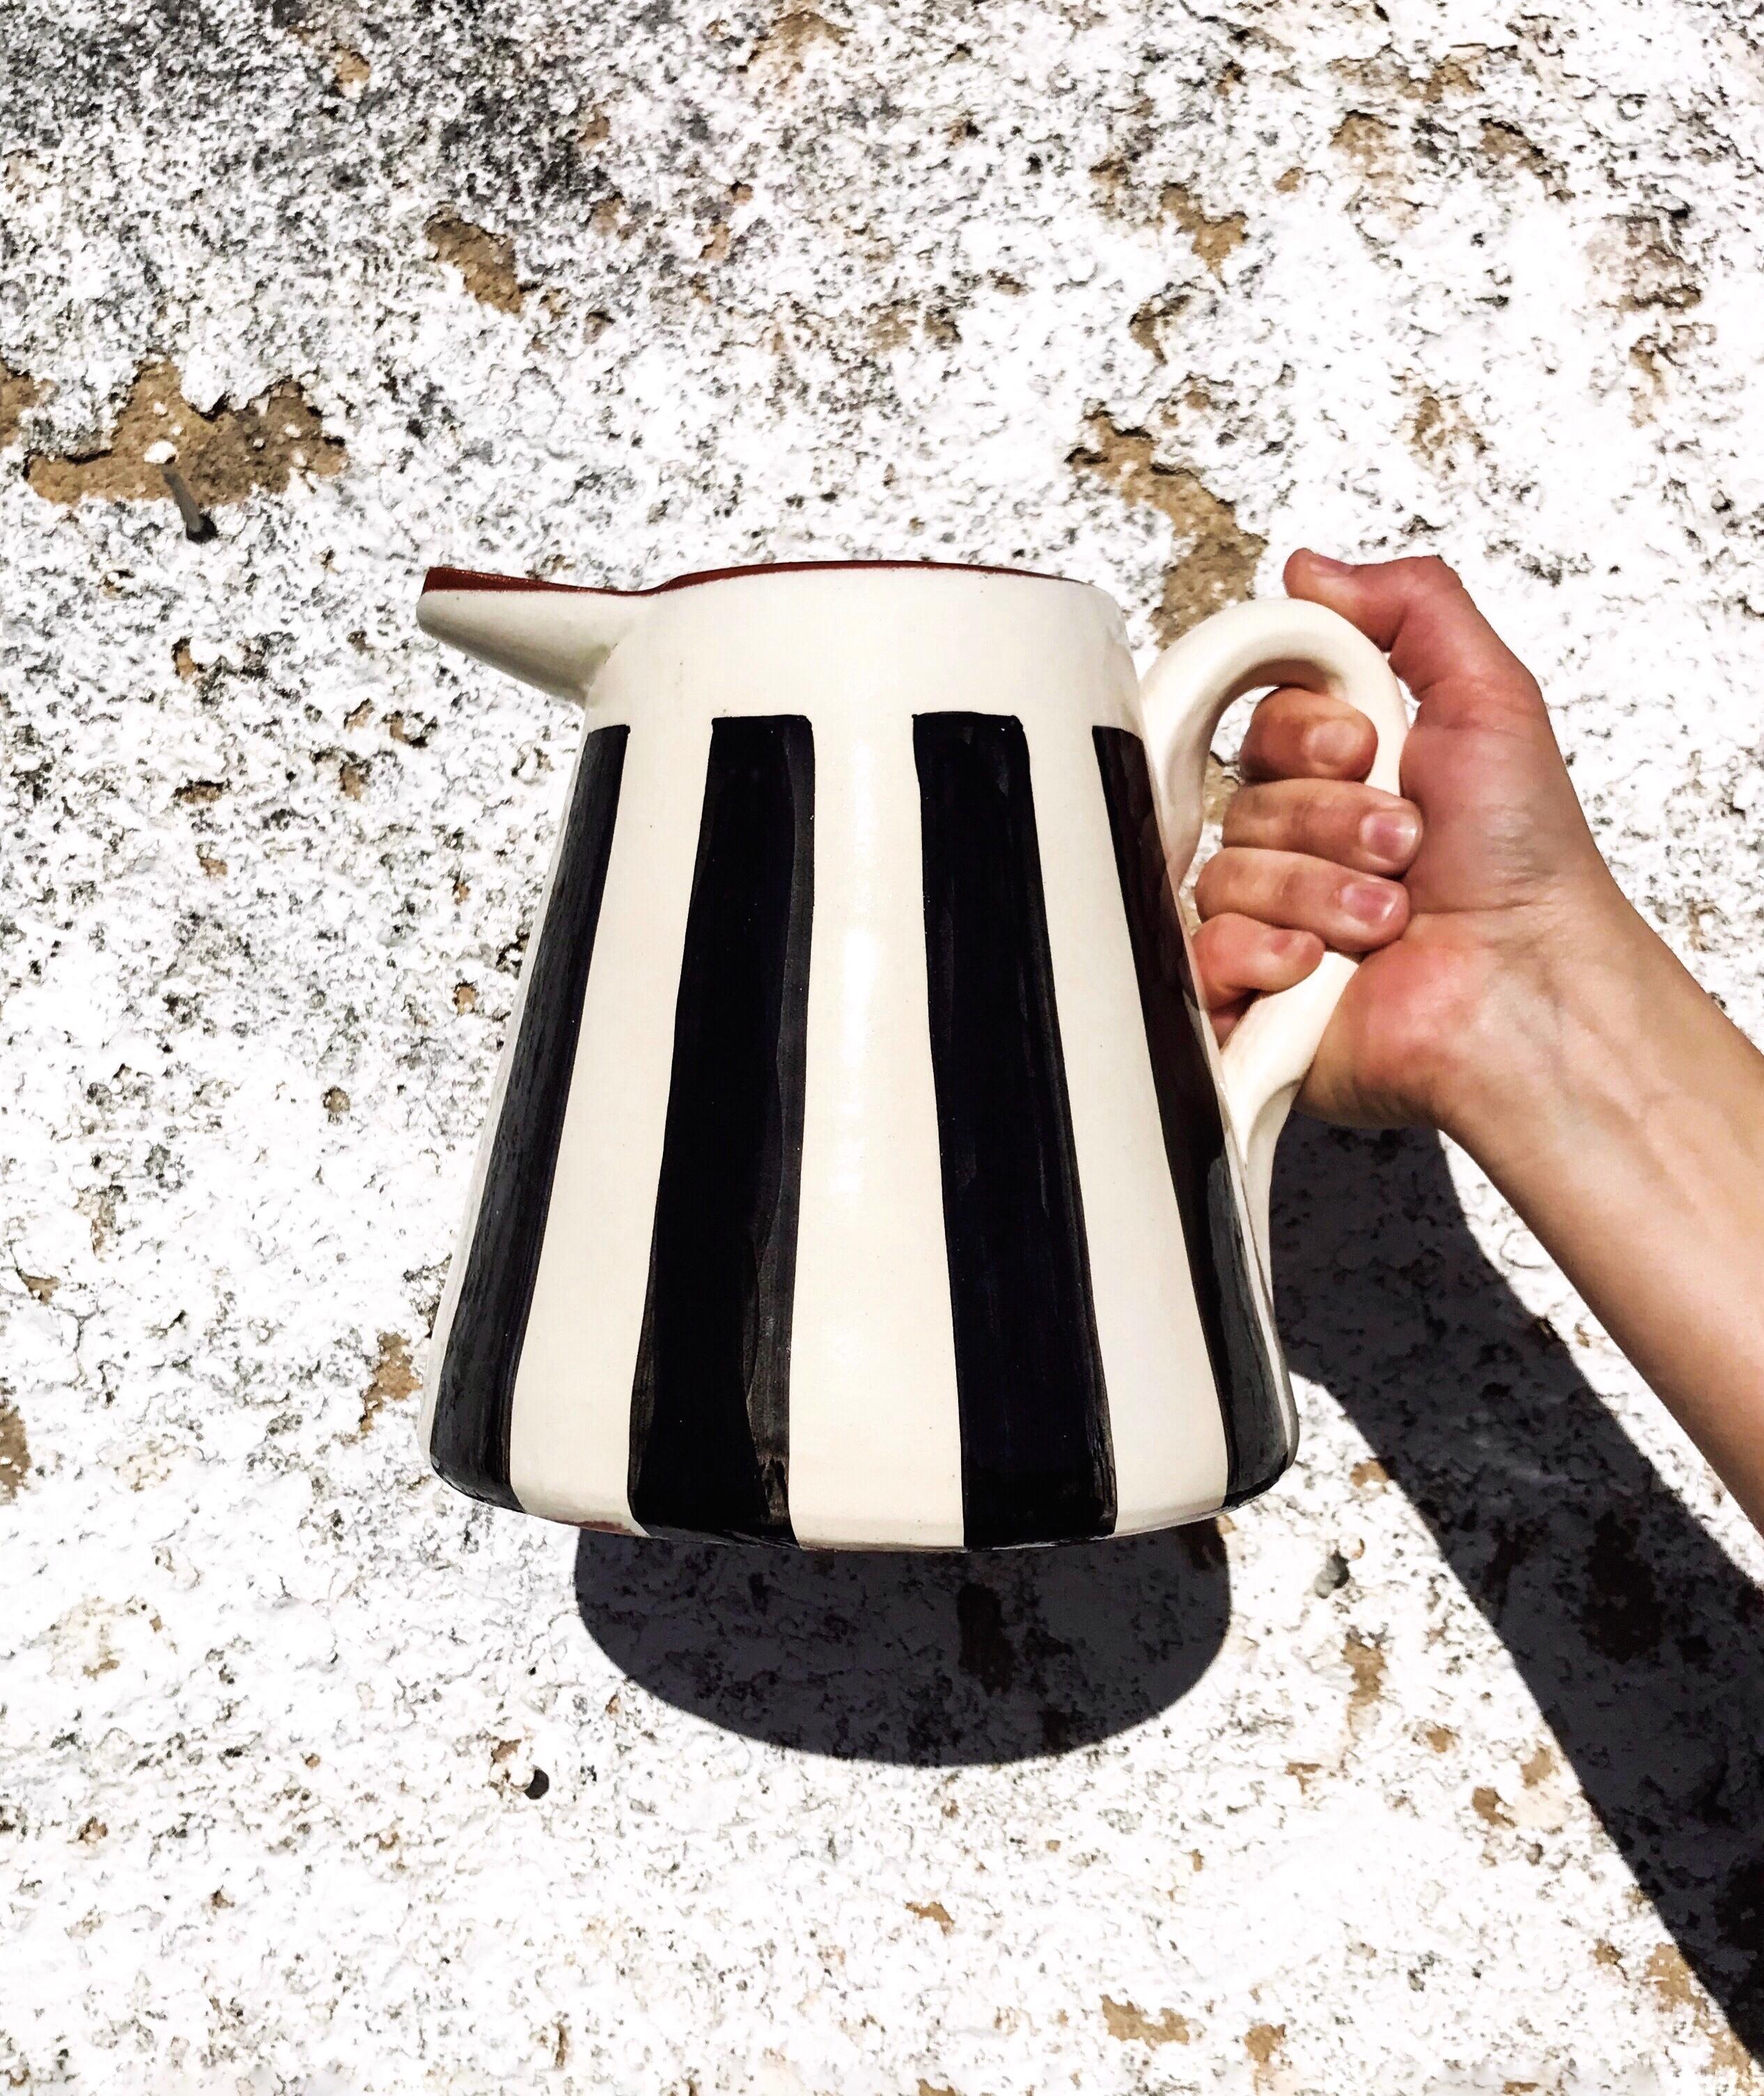 Portuguese Handmade Ceramic Small Pitcher with Graphic Black and White Design, in Stock